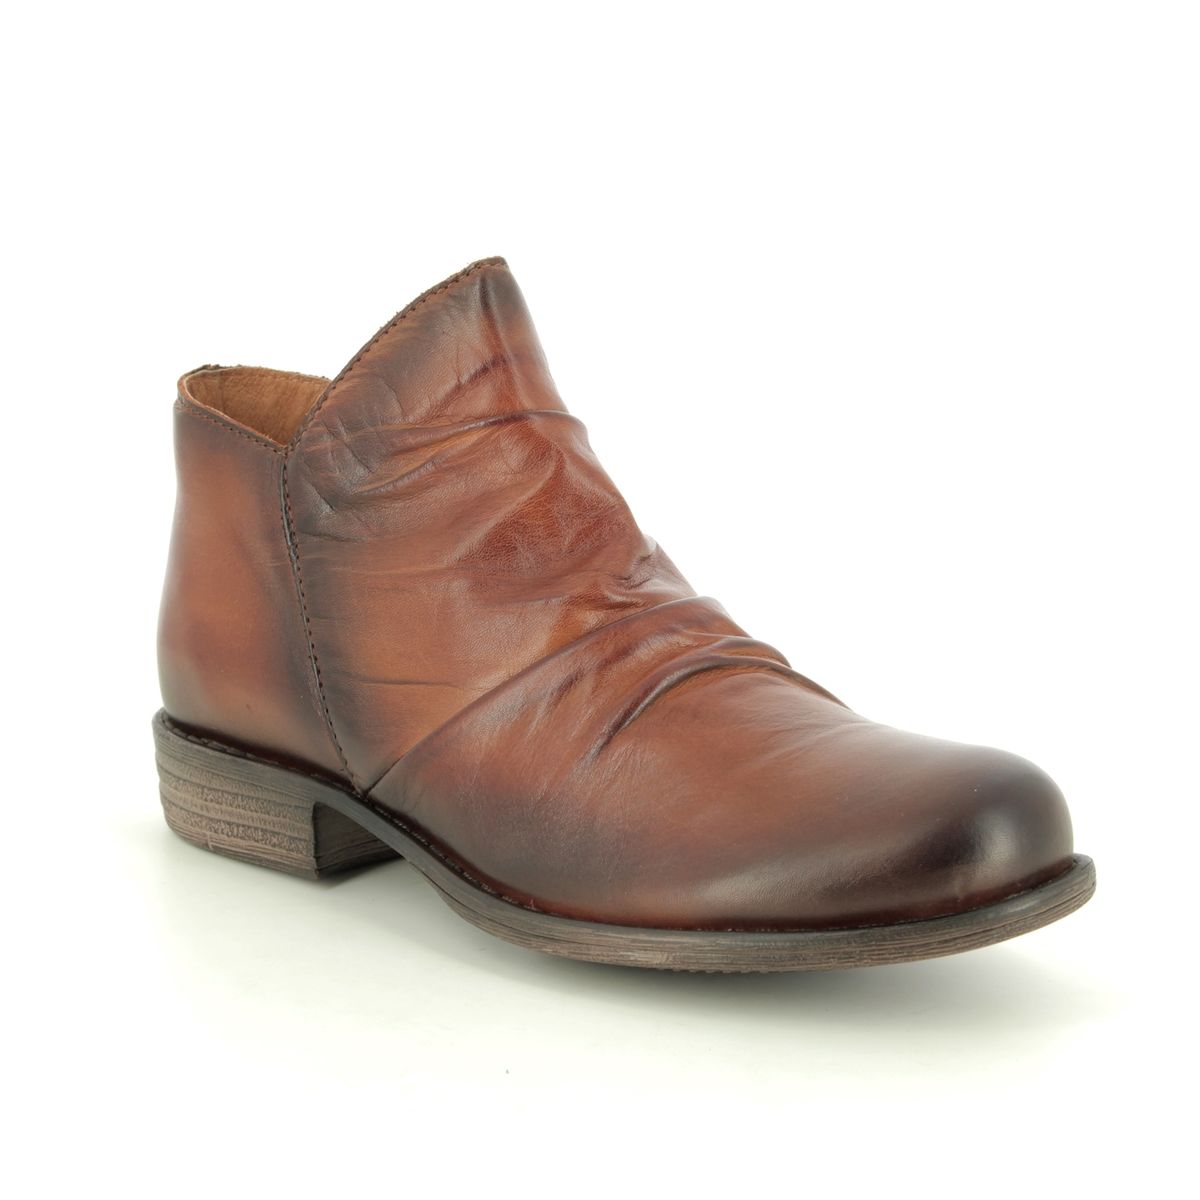 Creator Muskro Brown leather Womens Ankle Boots IB18387-20 in a Plain Leather in Size 42